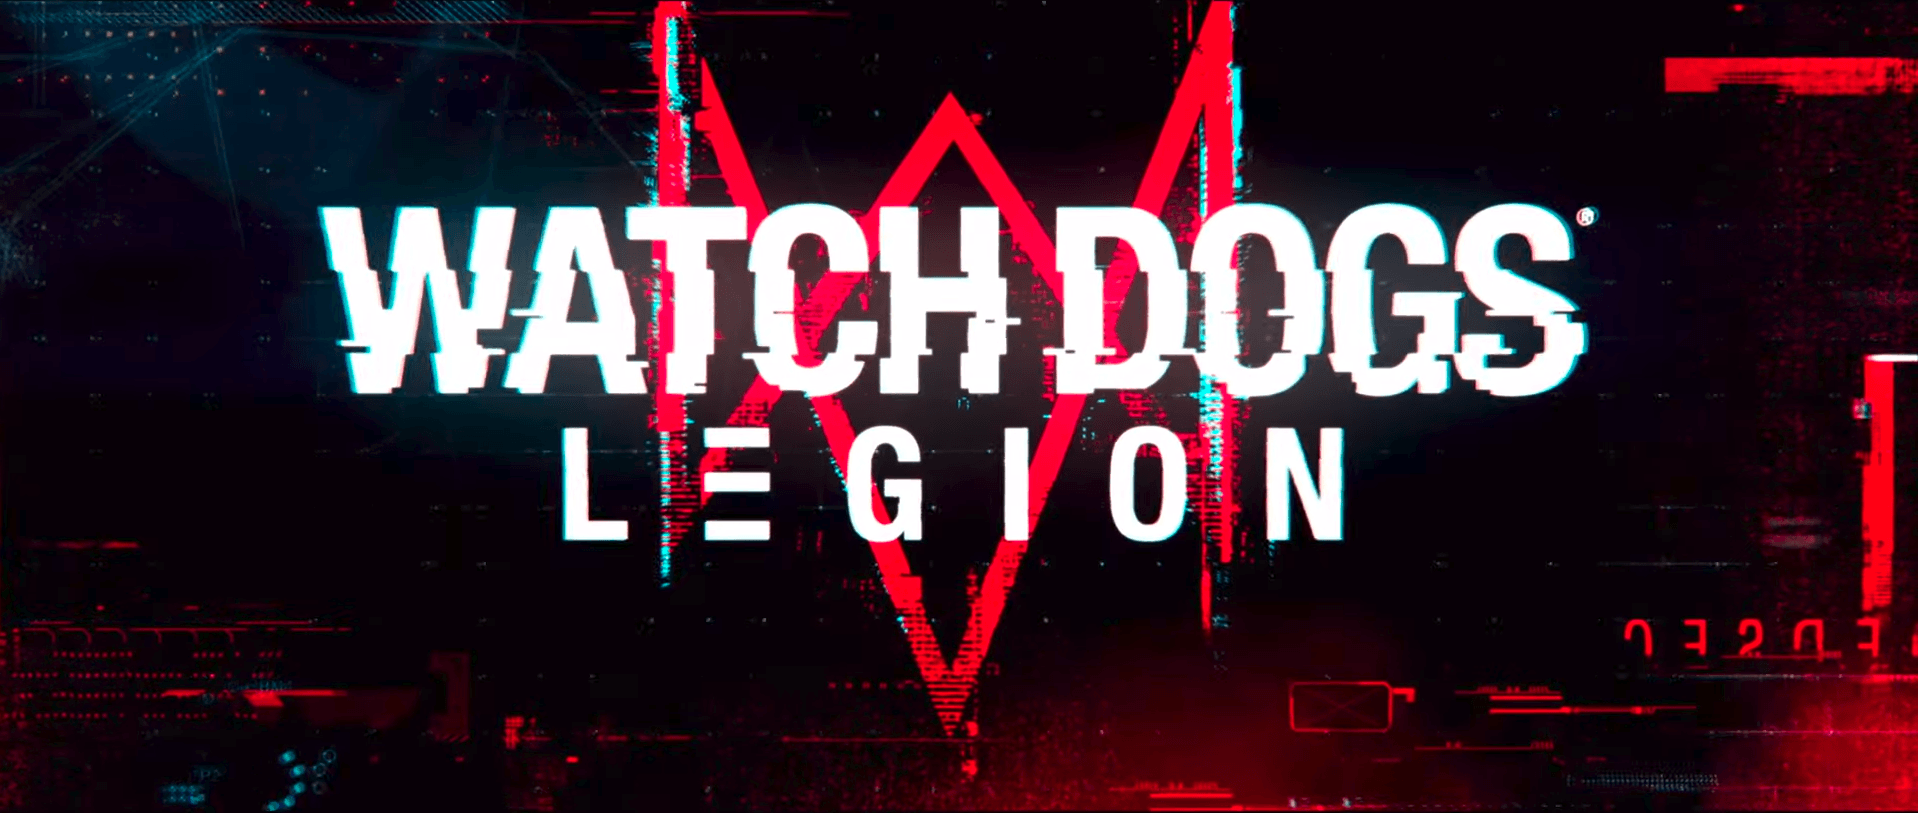 Watch Dogs Legion Game Wallpapers Wallpaper Cave